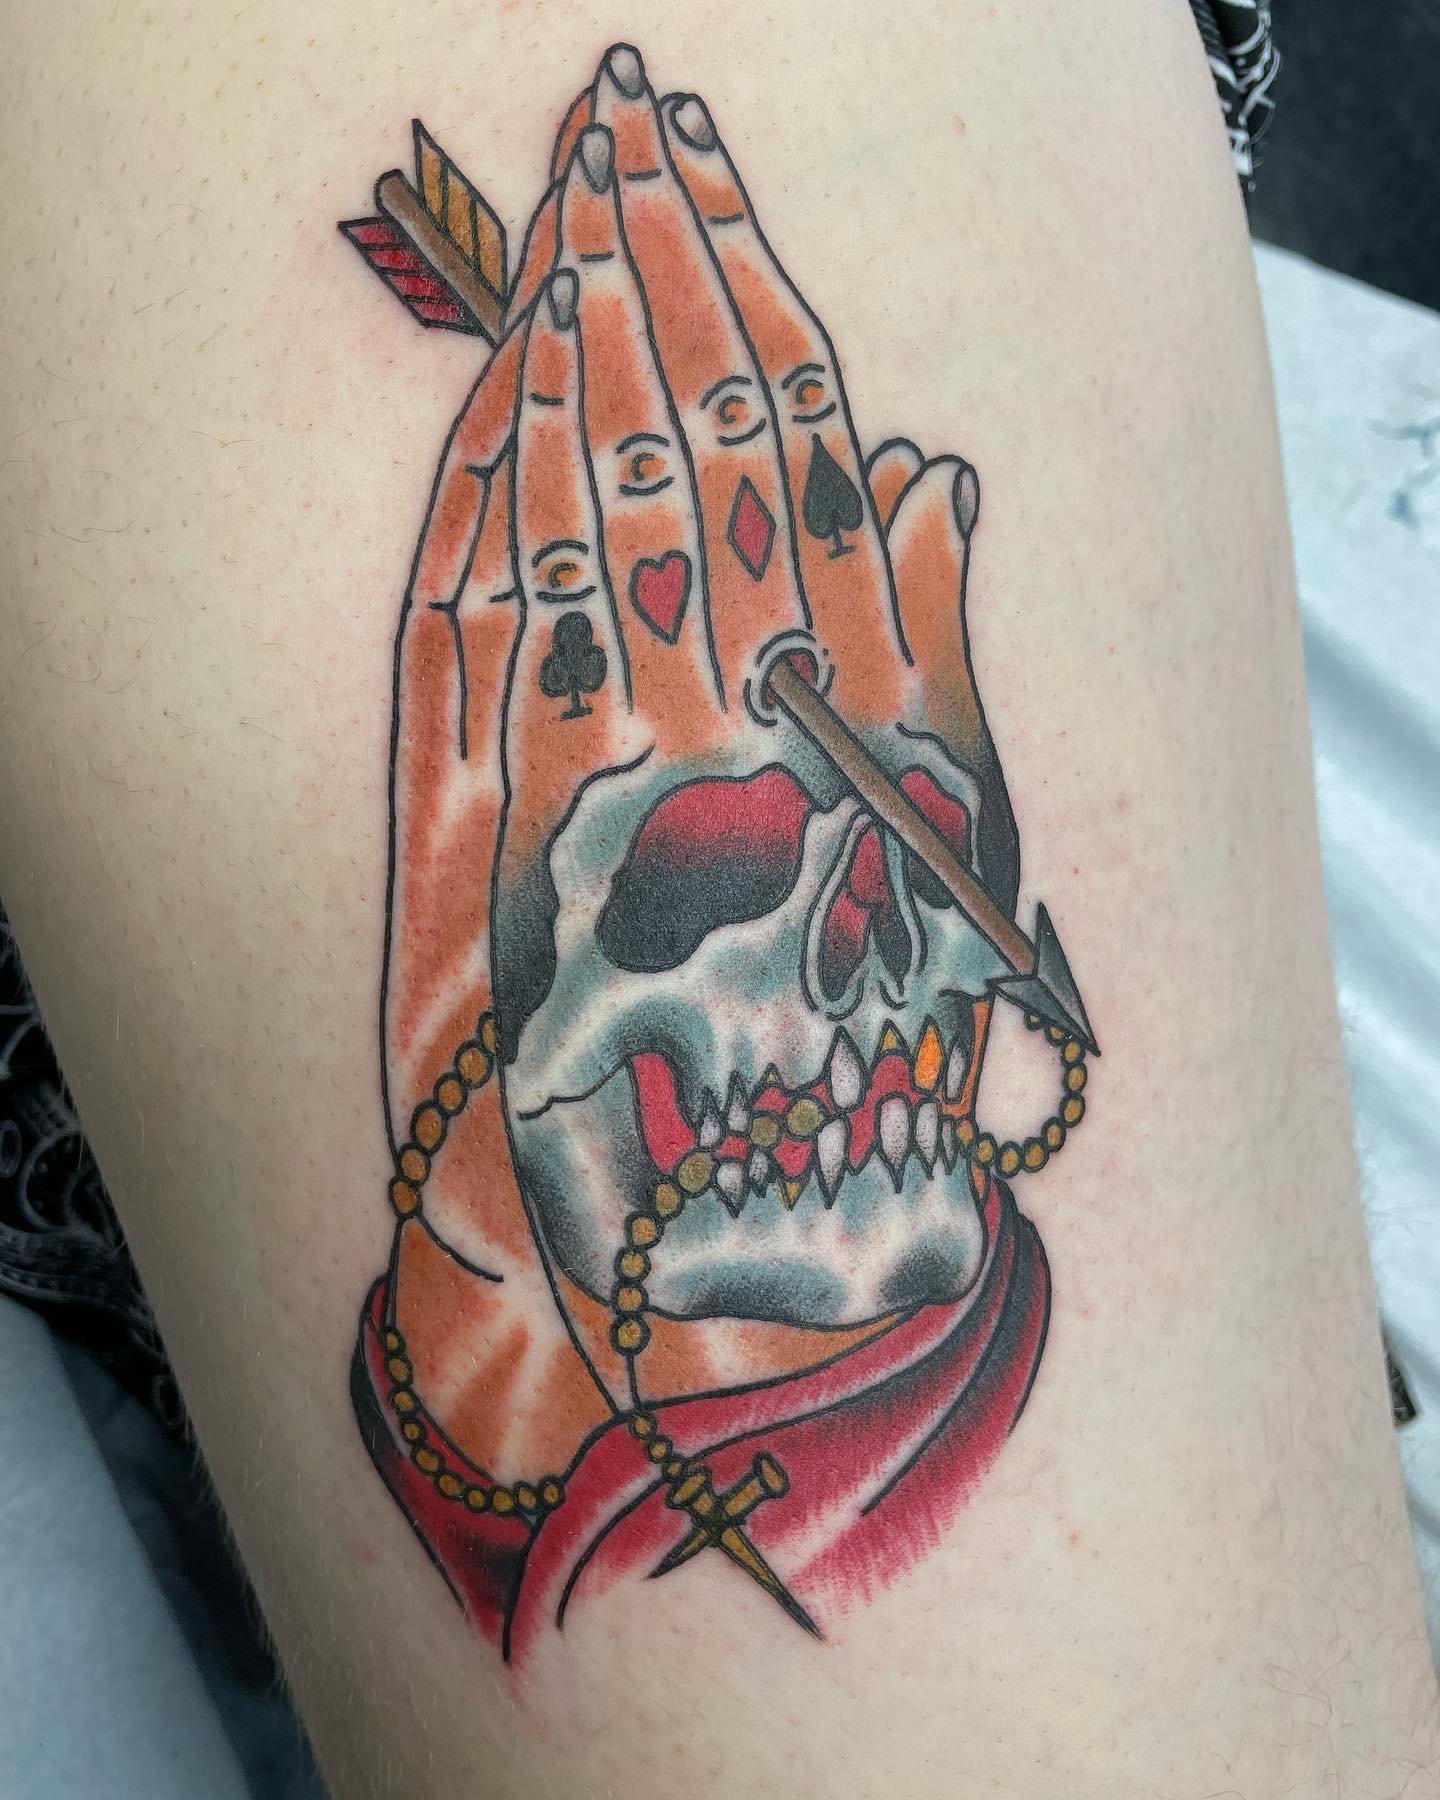 If you want to get a quirky and fun prayer hands tattoo, this one may be a perfect choice. A skeleton and arrow look amazing with colorful details.